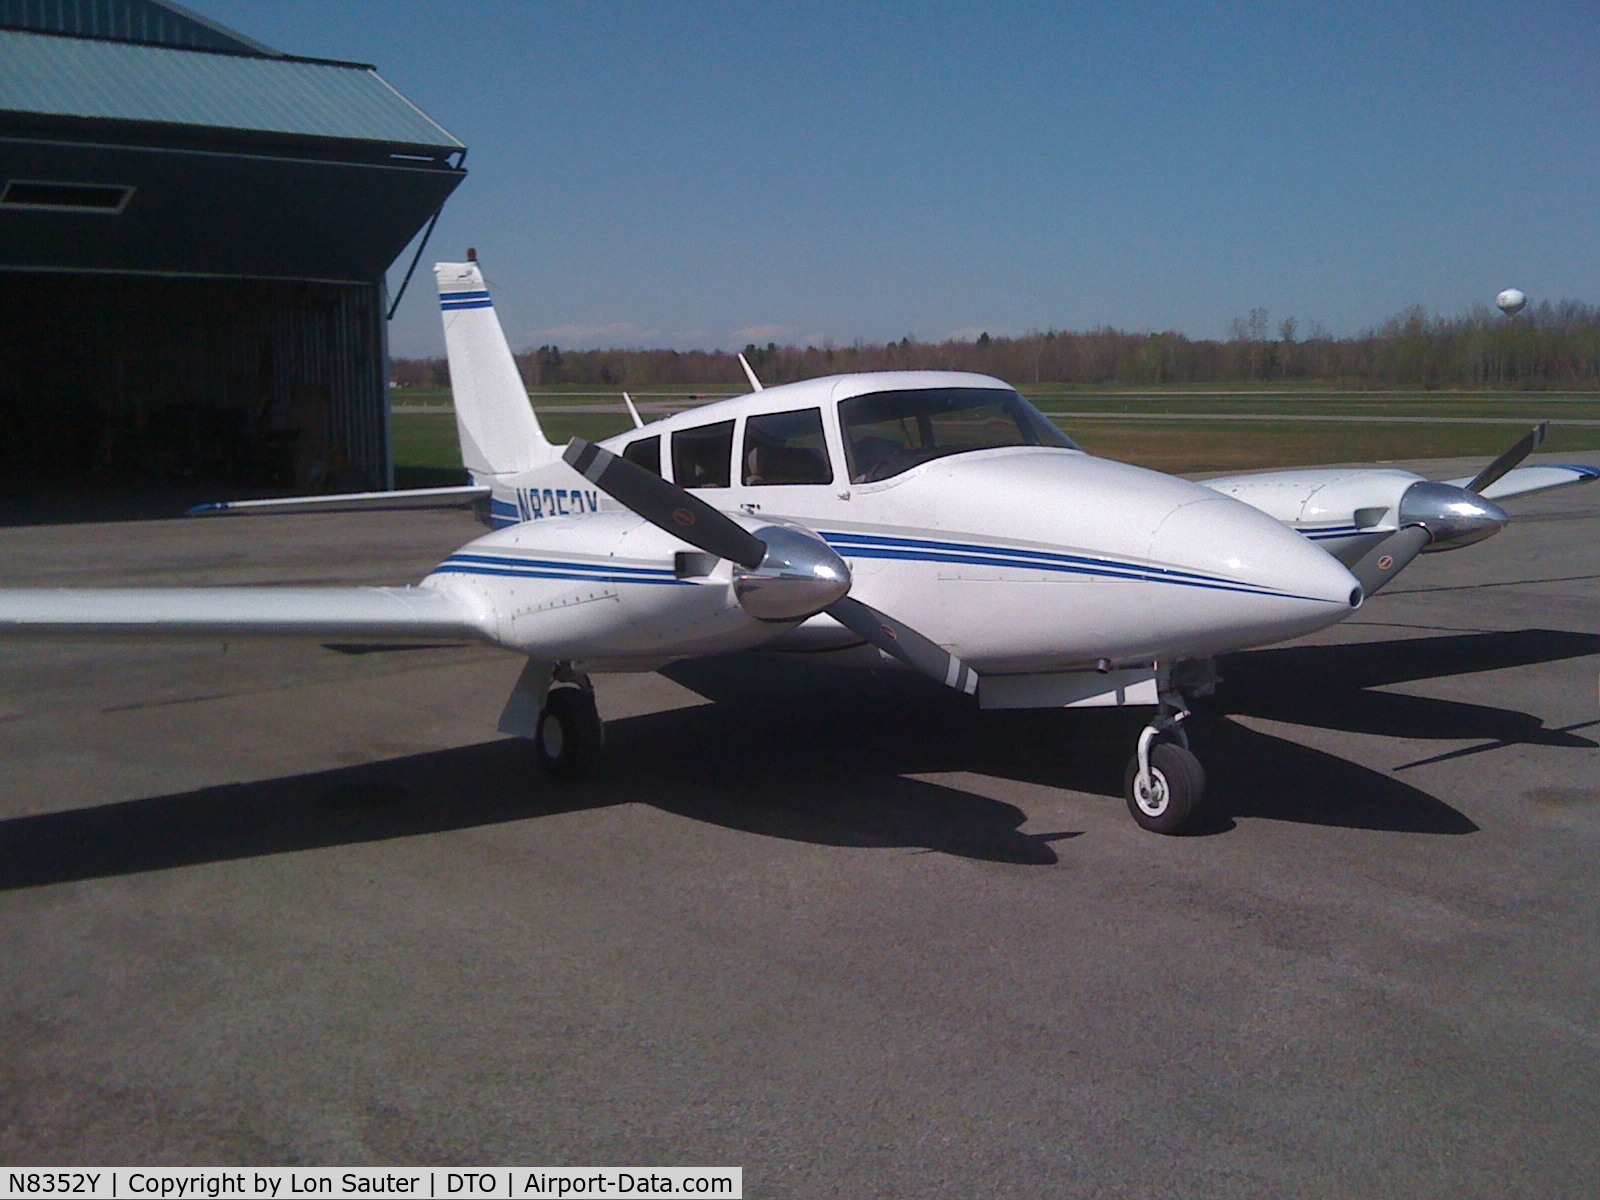 N8352Y, 1967 Piper PA-30 Twin Comanche C/N 30-1499, Current pictire of N8352Y